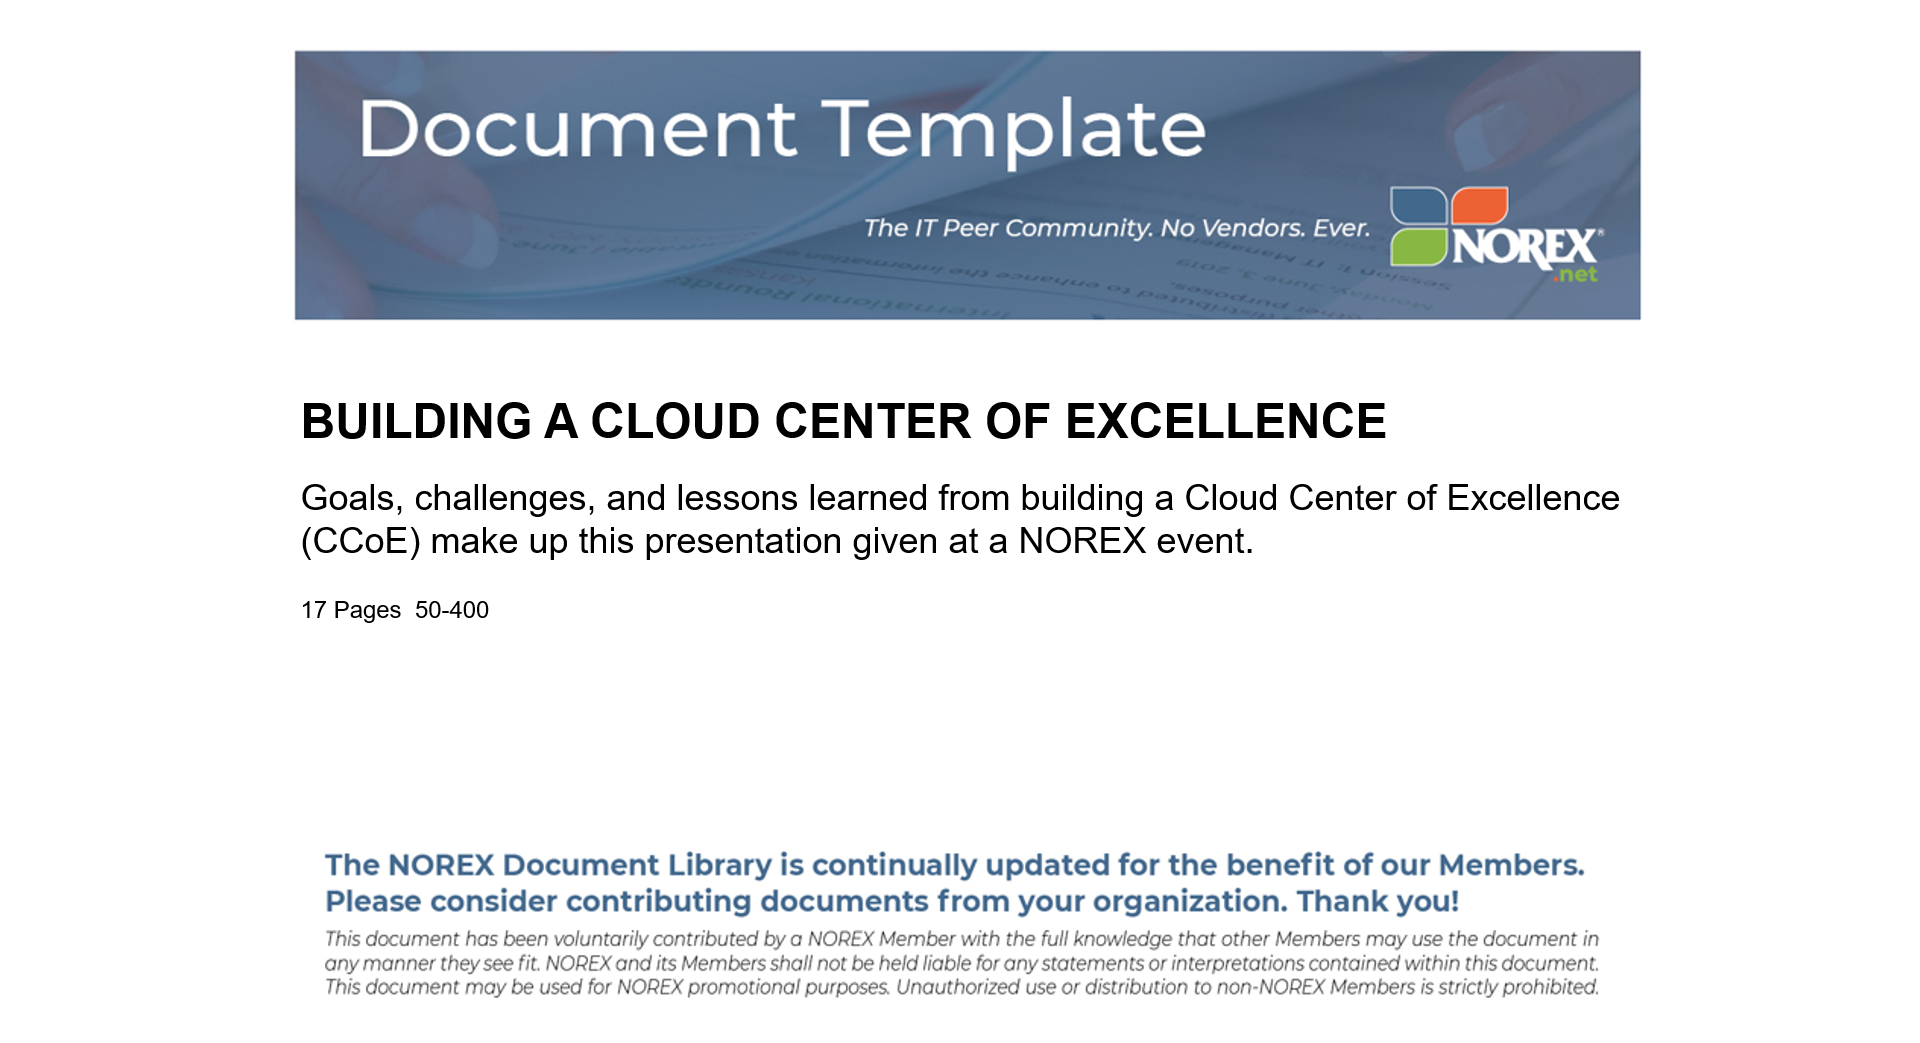 NOREX - Cloud Center of Excellence (CCoE) Template